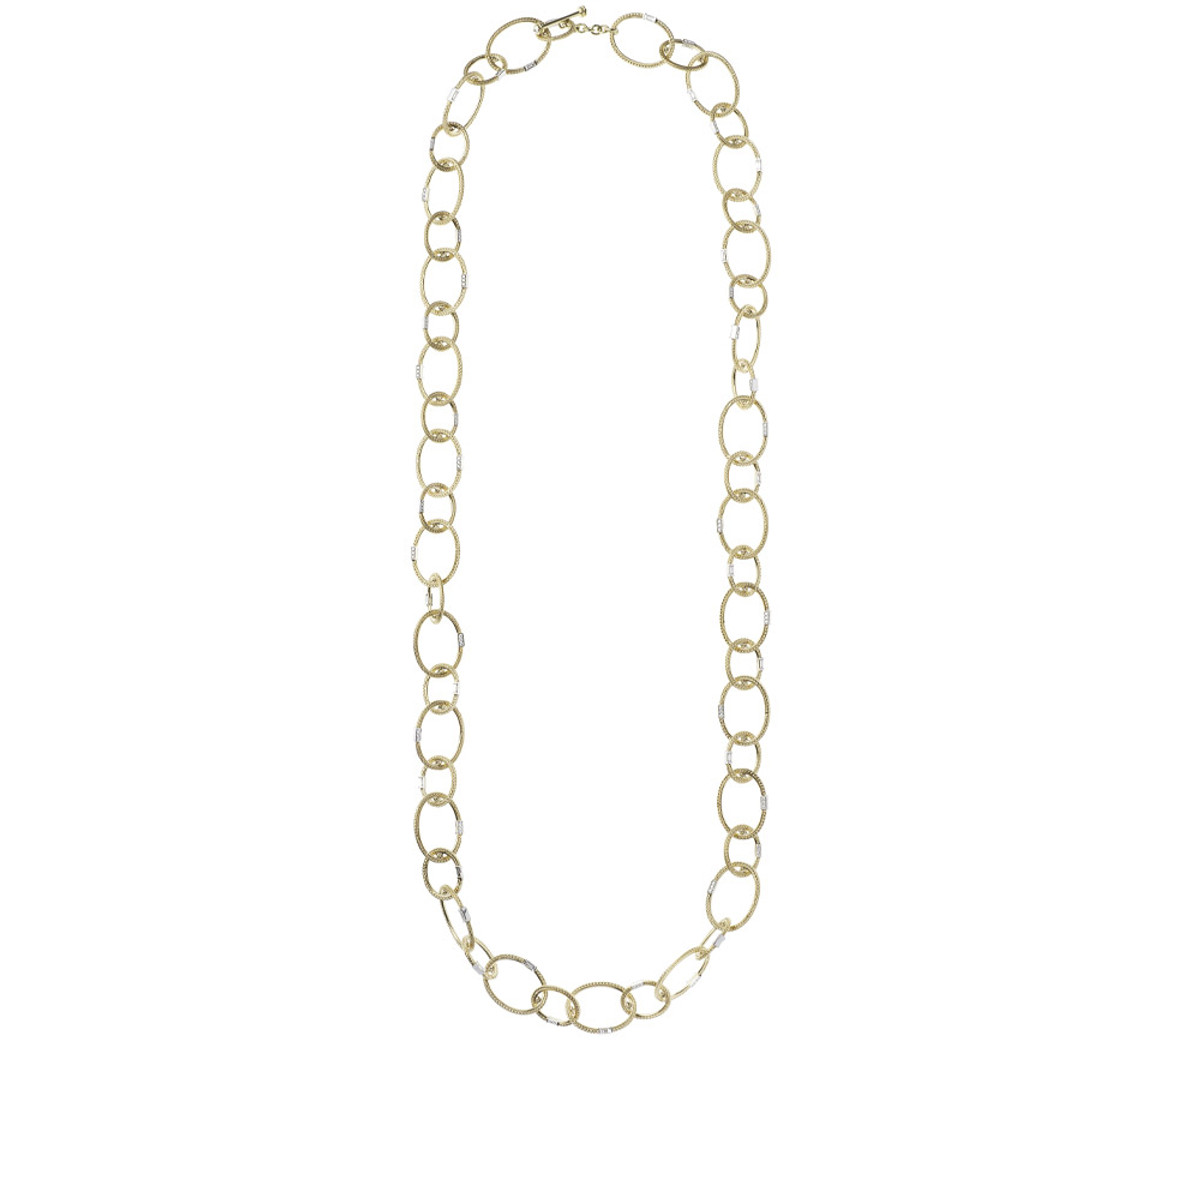 Nikos Koulis 18K White and Yellow Gold Together Chain Link Diamond Necklace-58413